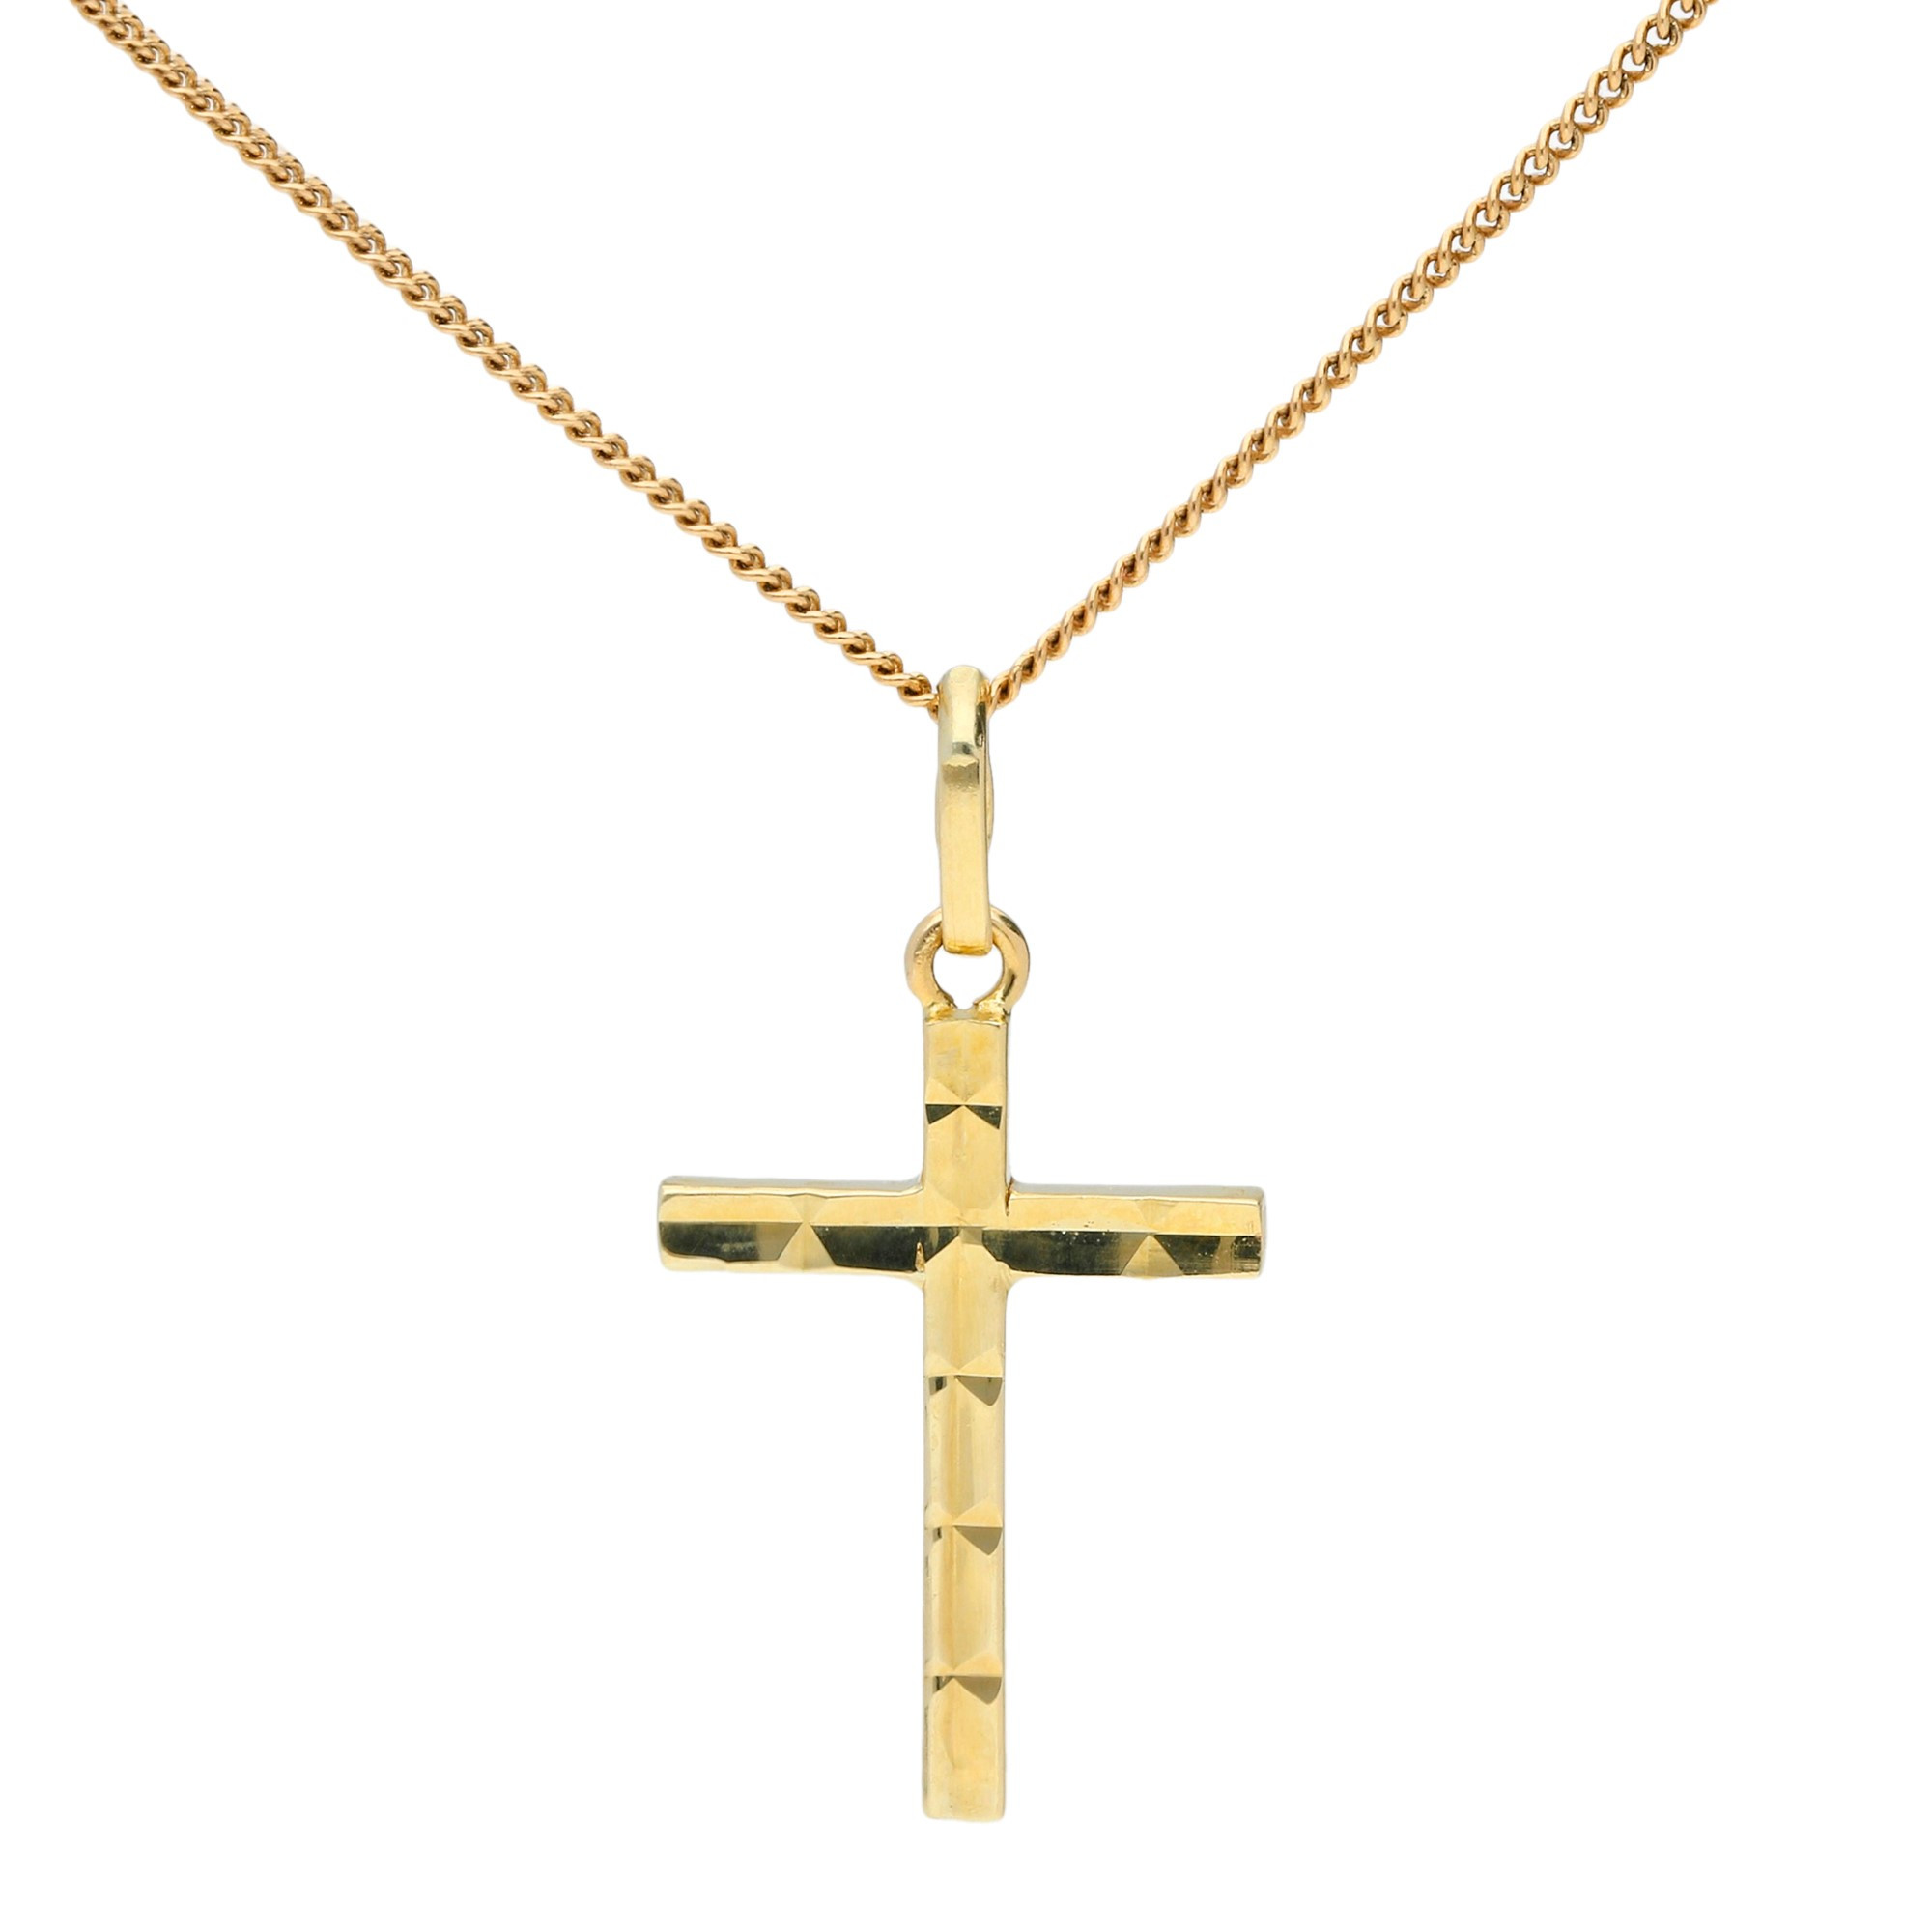 Child's 2.5-3mm Cultured Pearl Cross Pendant Necklace in 14kt Yellow Gold.  15